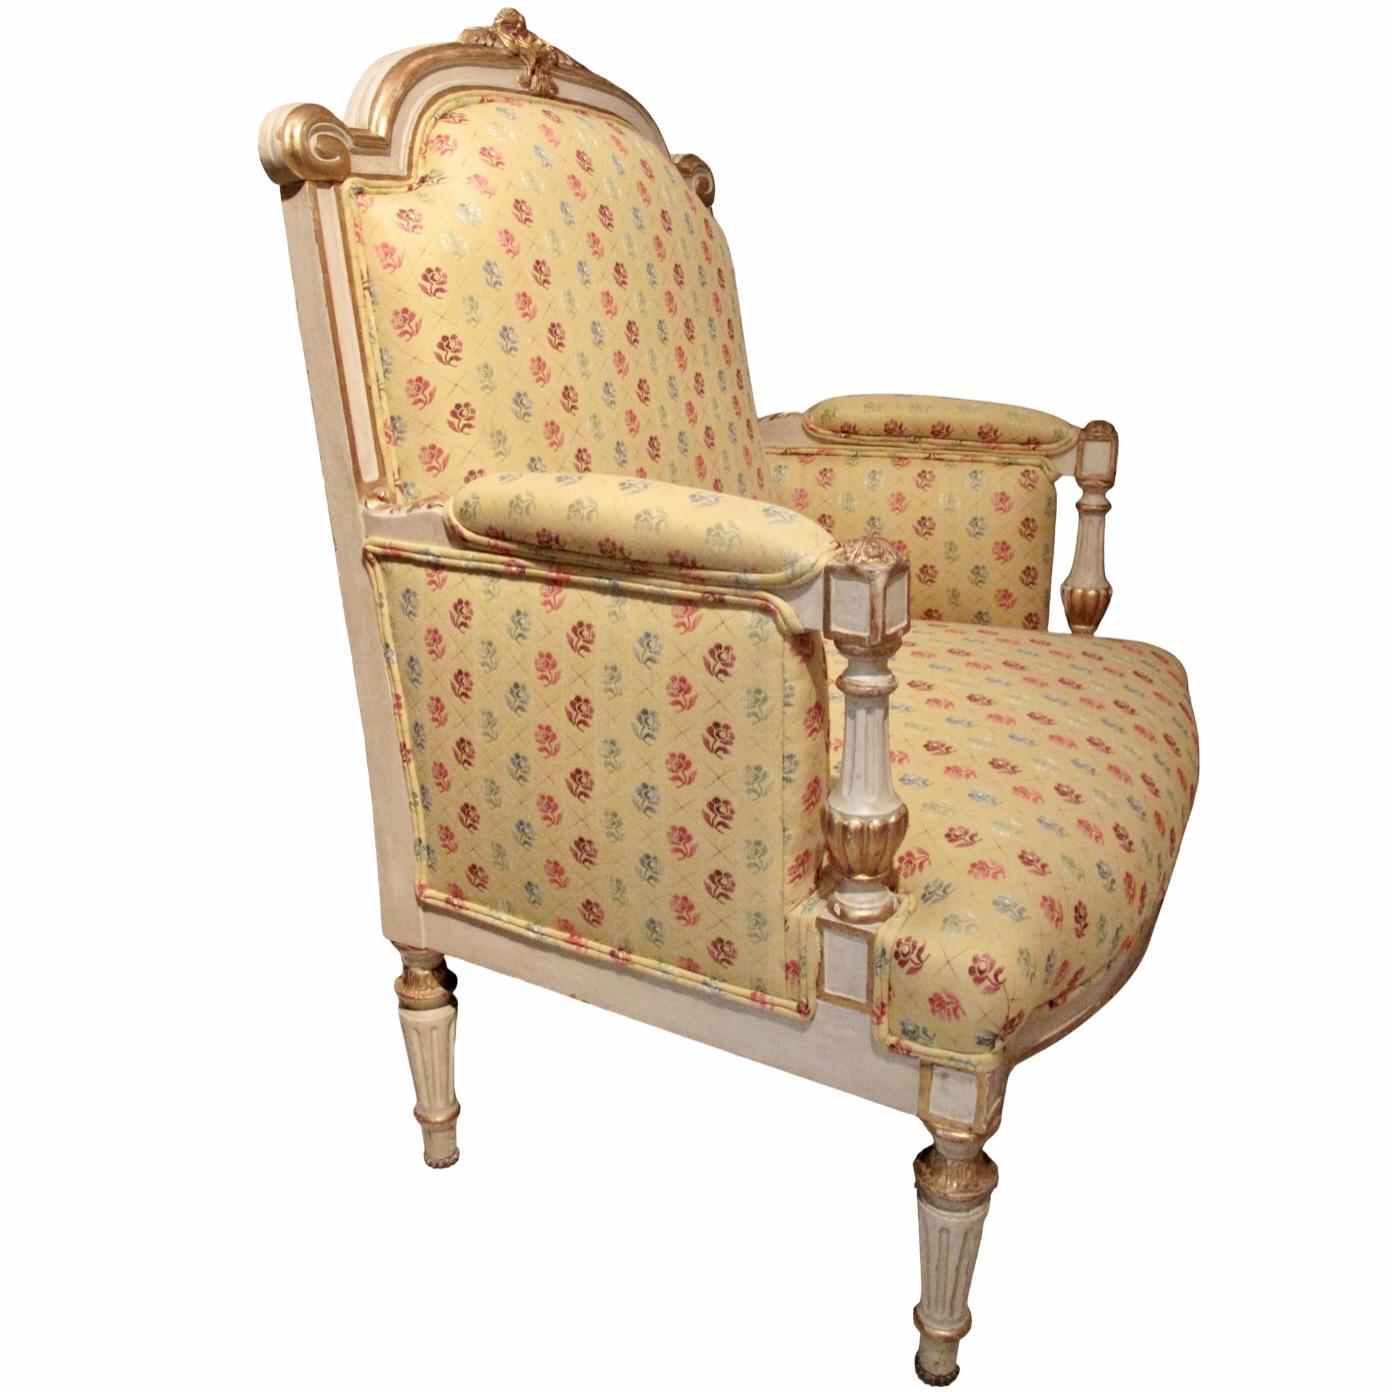 Hand-Carved Italian Painted And Parcel Gilt Marquise Armchair, 19th Century For Sale